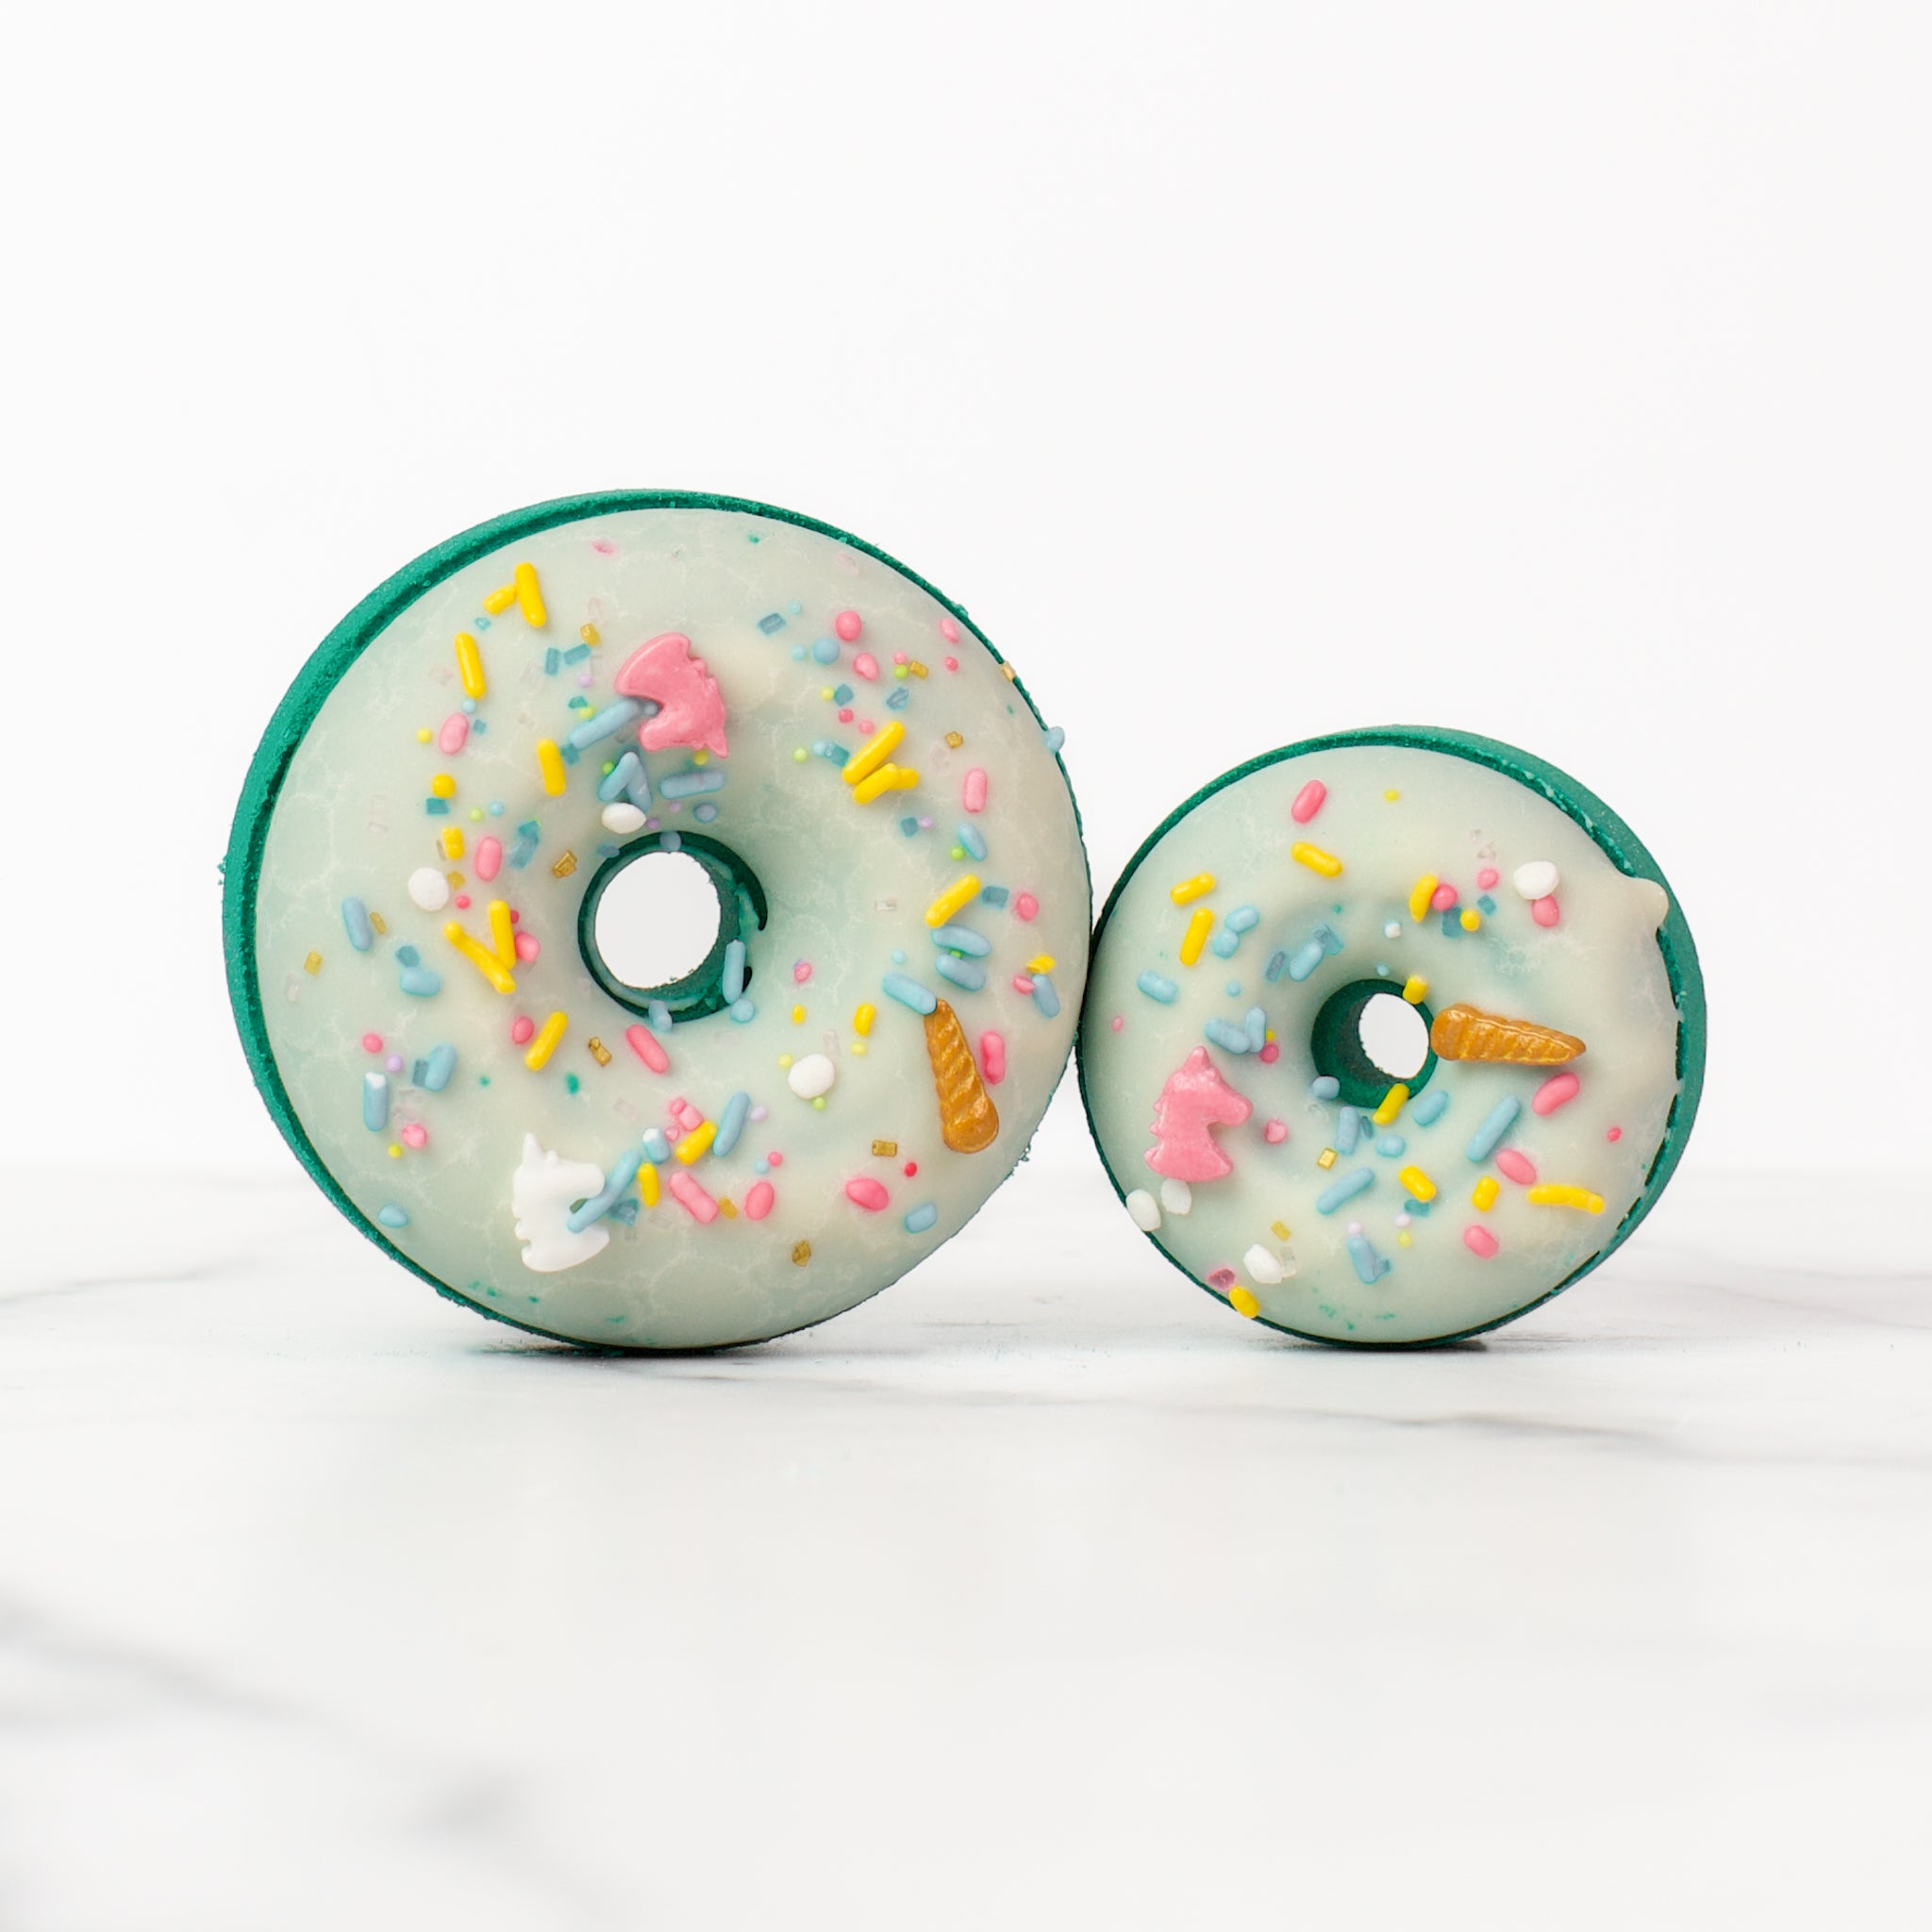 One large and one small donut Volcano bath bombs on a white background. Volcano is a teal bath bomb with a white glaze and pastel unicorn sprinkles.